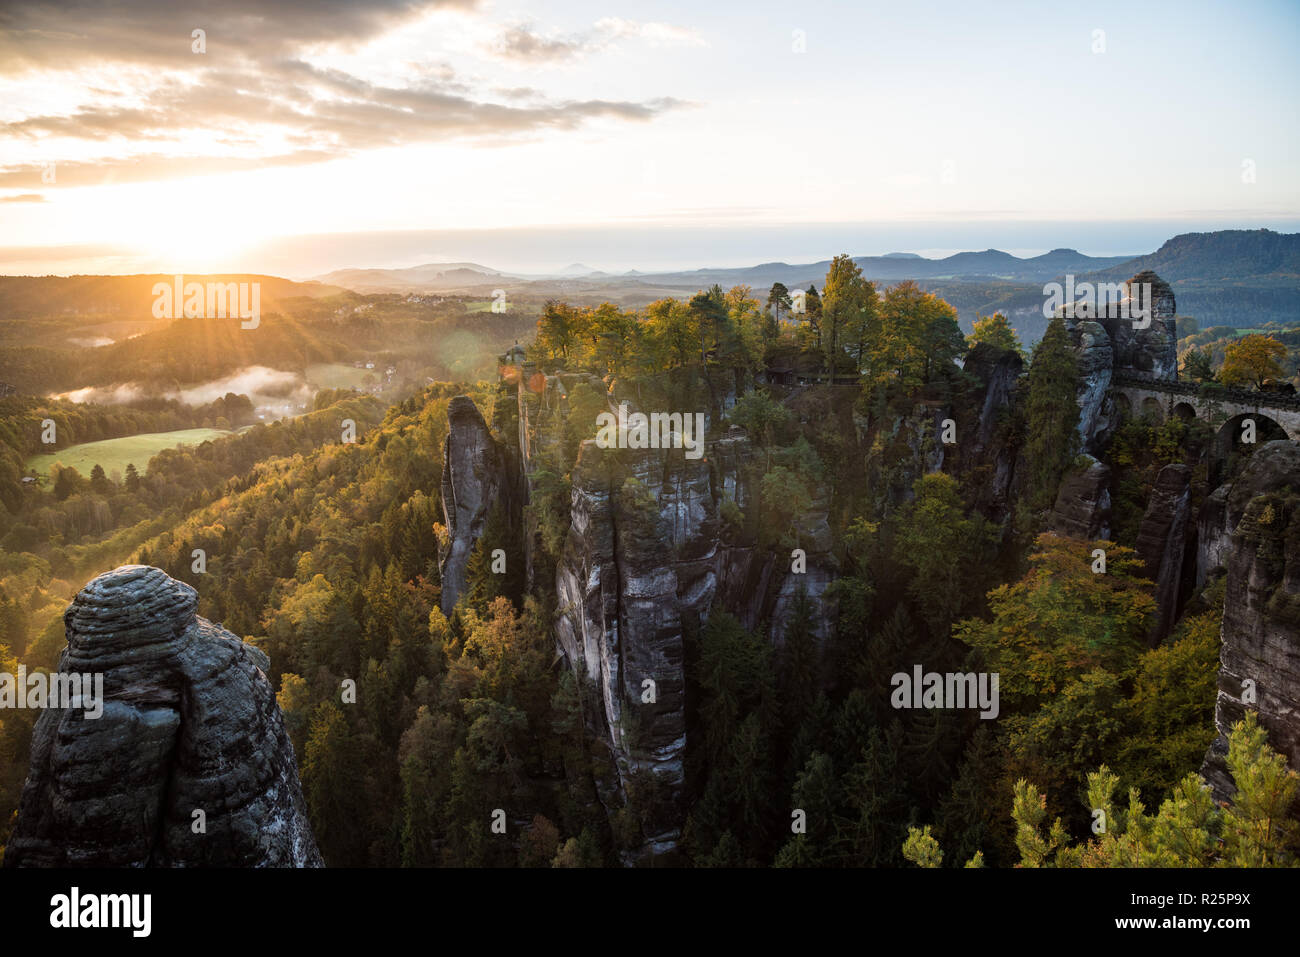 Sunrise In Autumn With A View Stock Photo